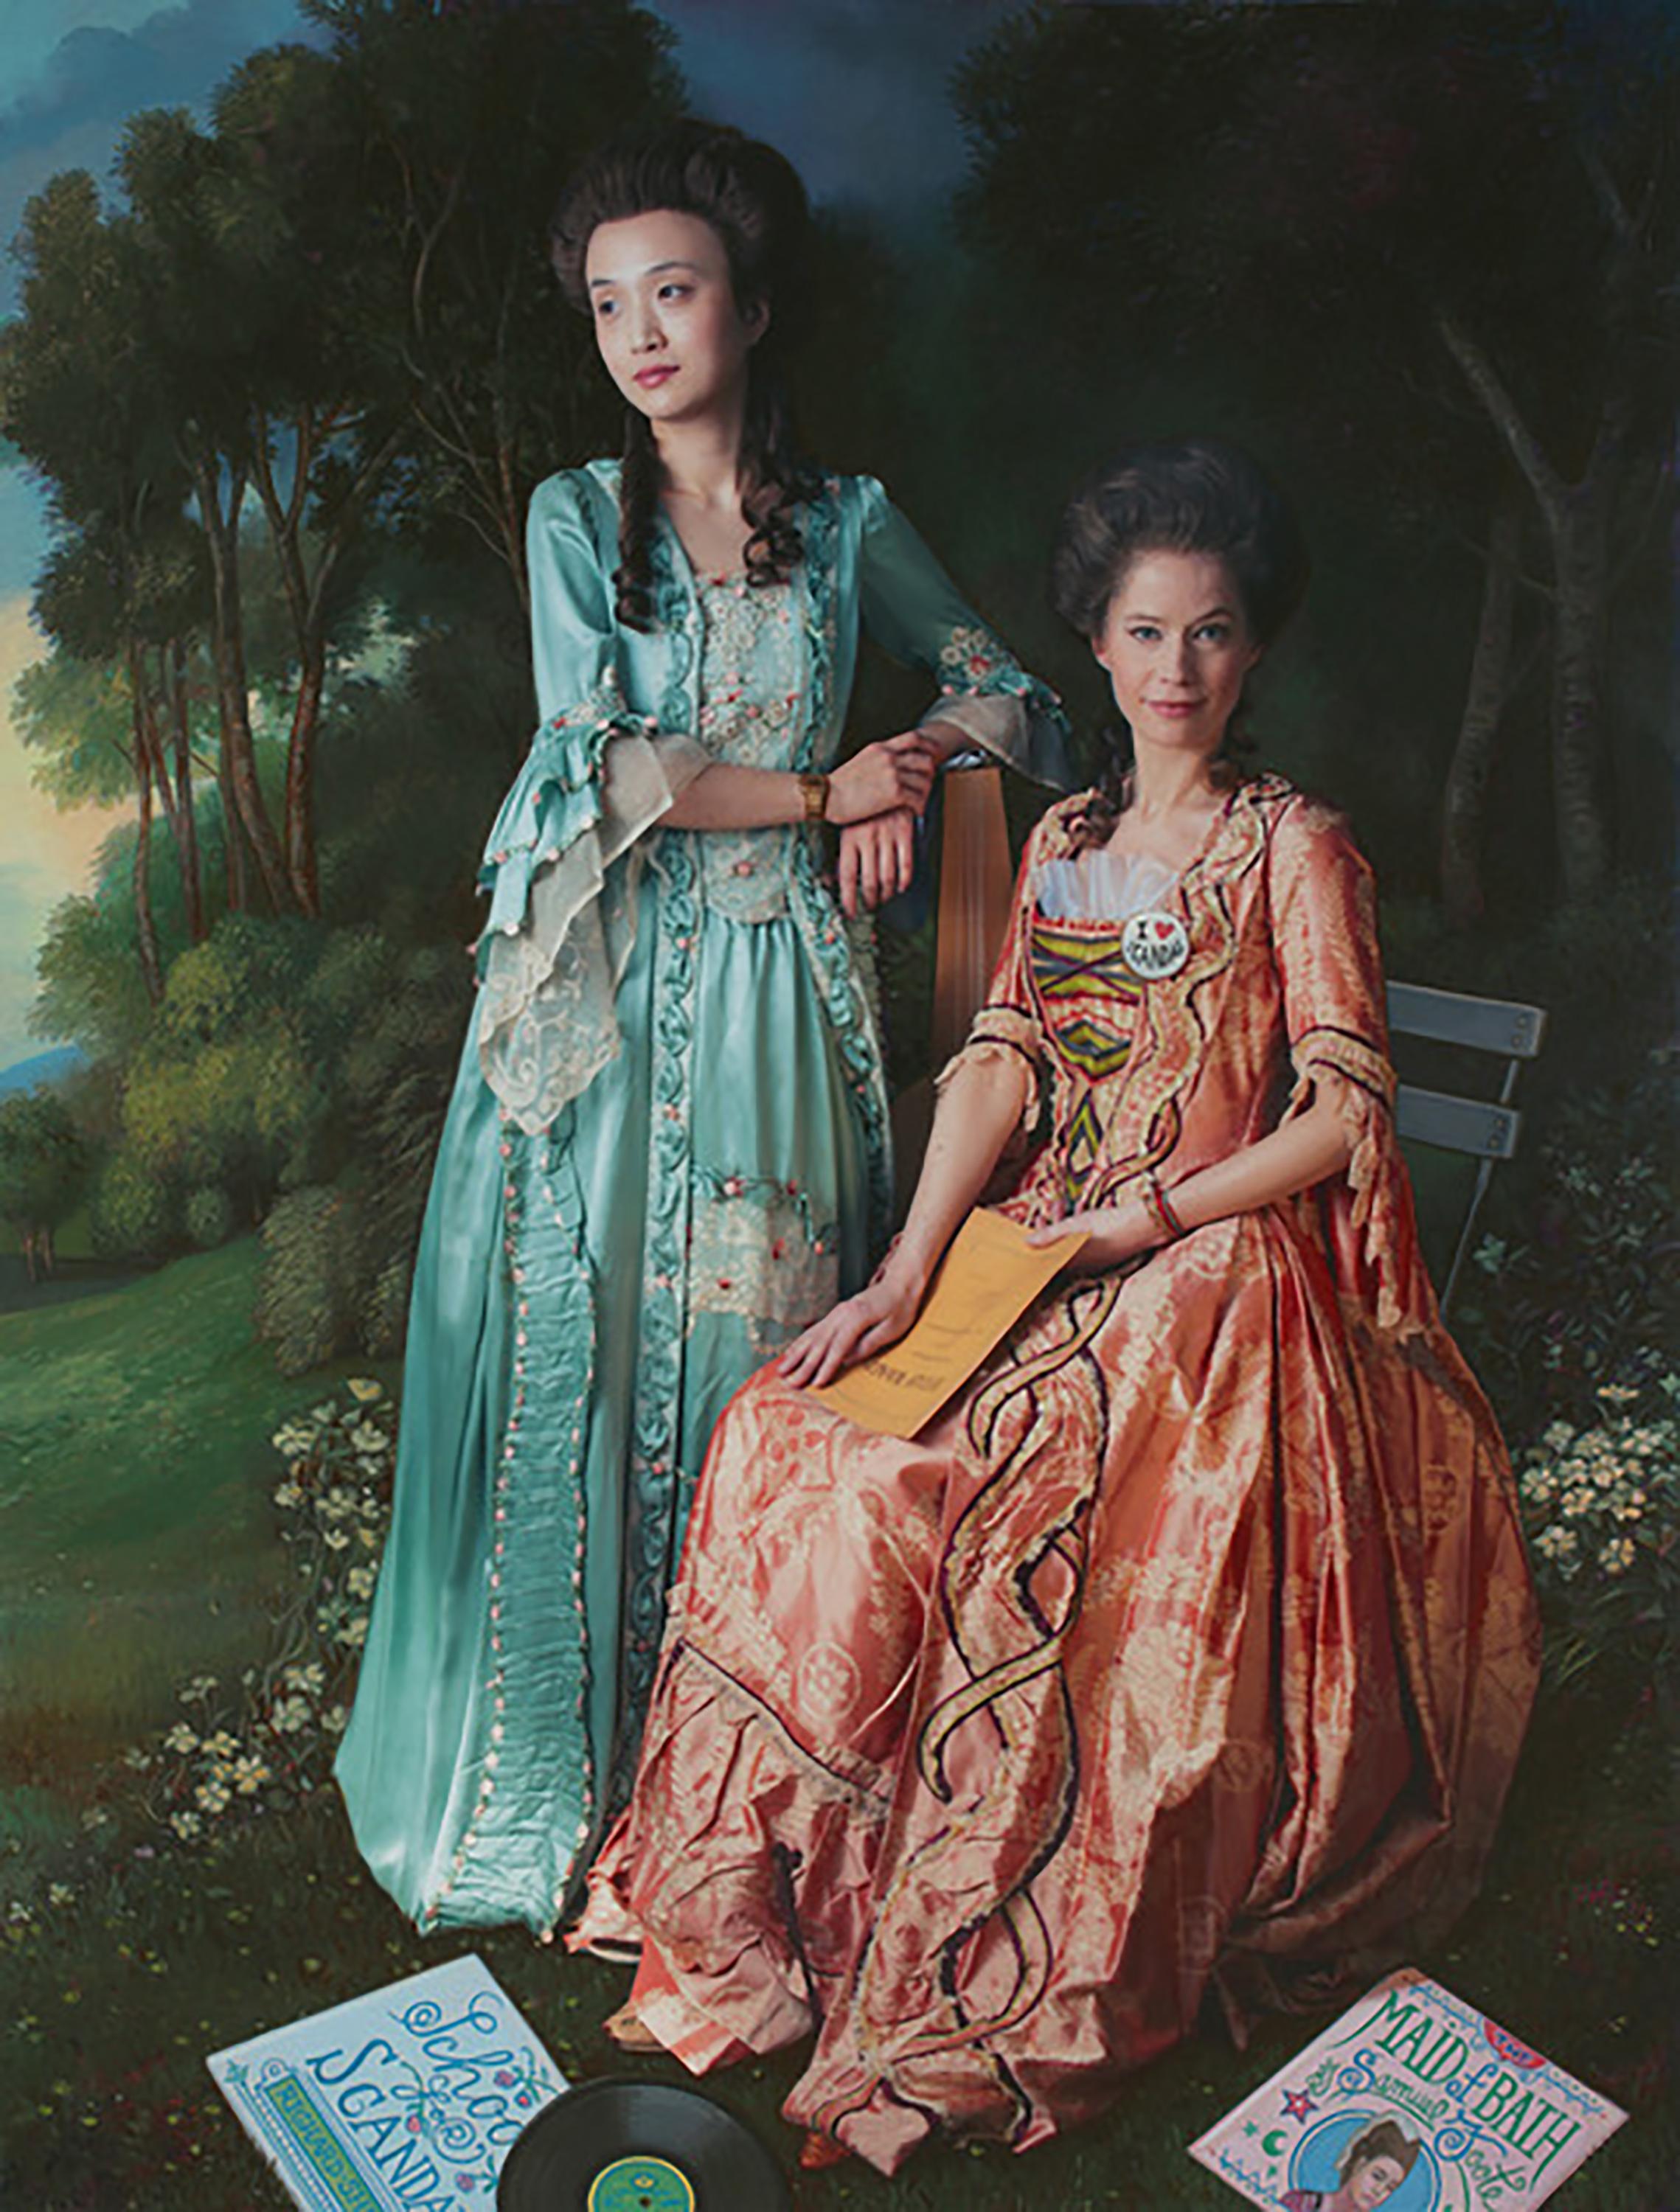 E2 - Kleinveld & Julien Figurative Photograph - Ode to Gainsborough's The Linley Sisters